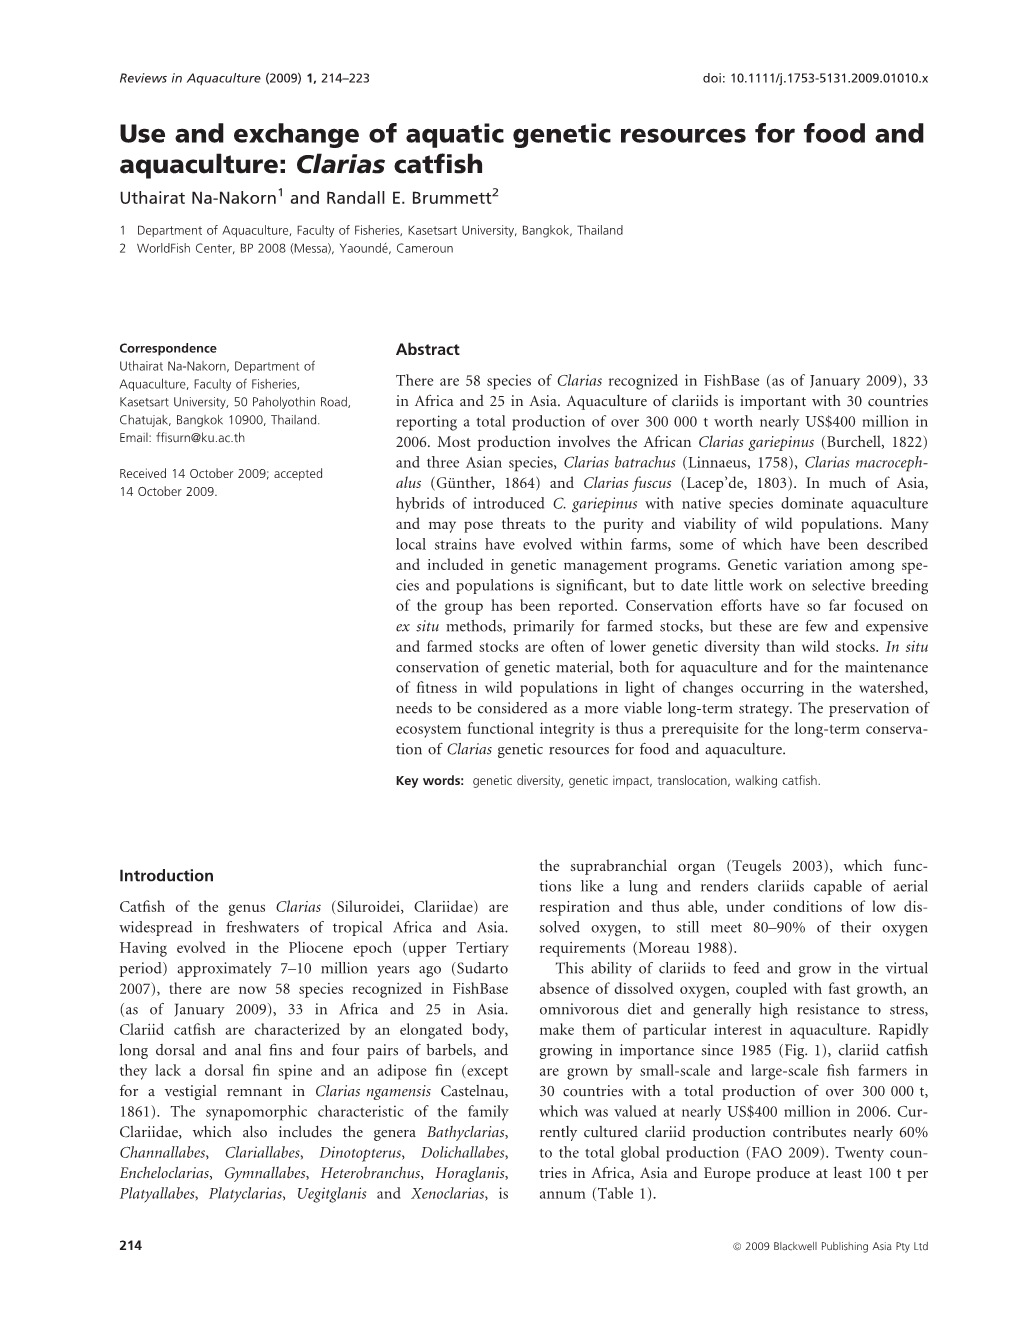 Use and Exchange of Aquatic Genetic Resources for Food and Aquaculture: Clarias Catﬁsh Uthairat Na-Nakorn1 and Randall E